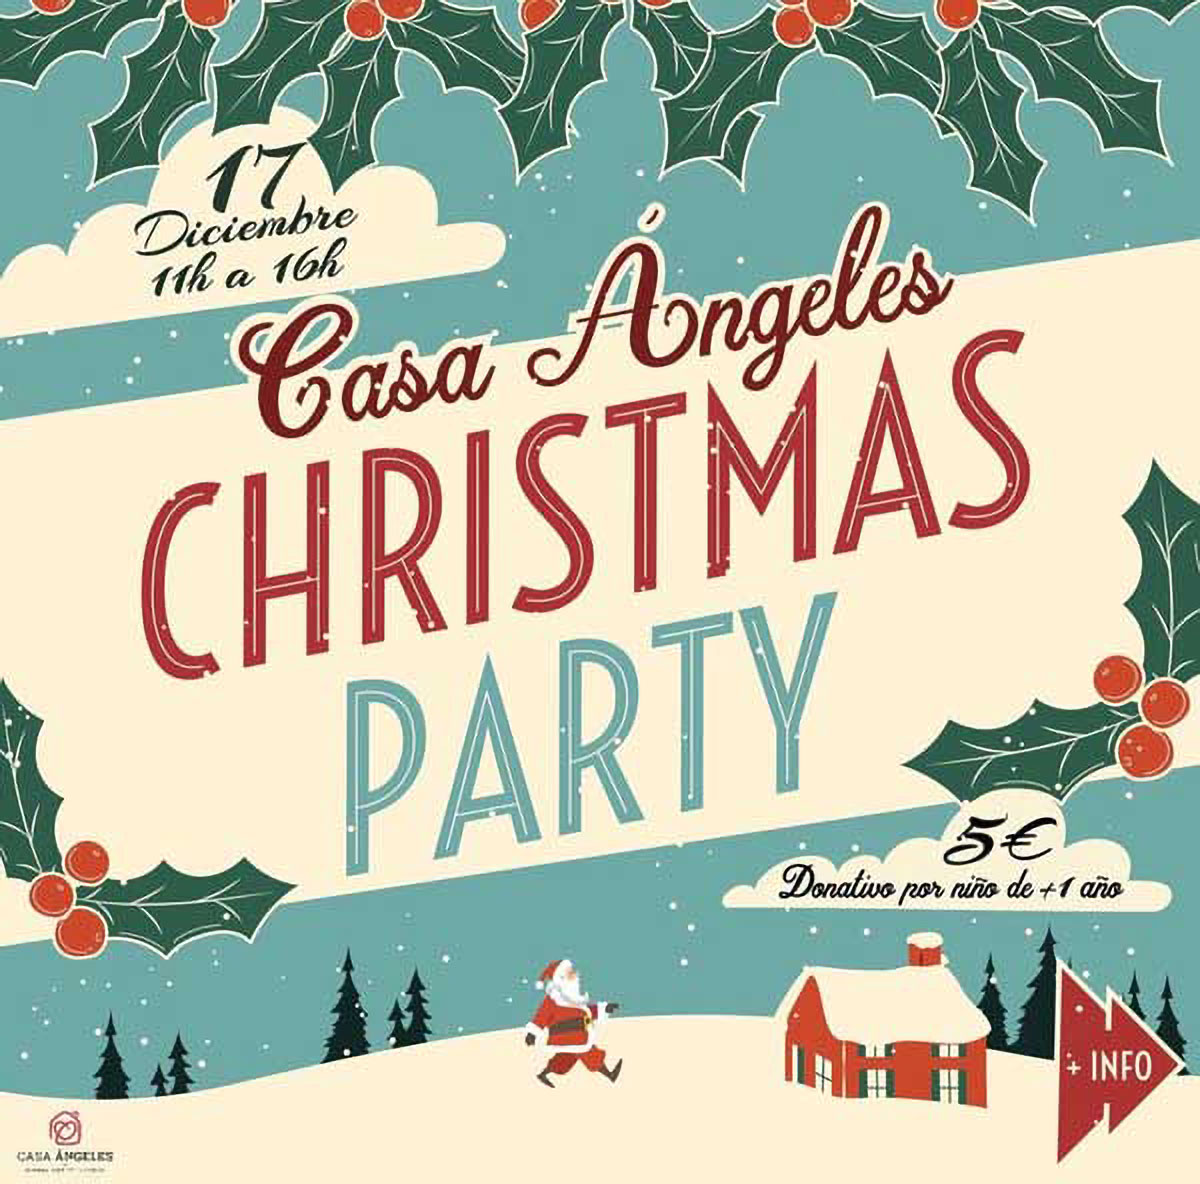 Casa Angeles Christmas Party poster